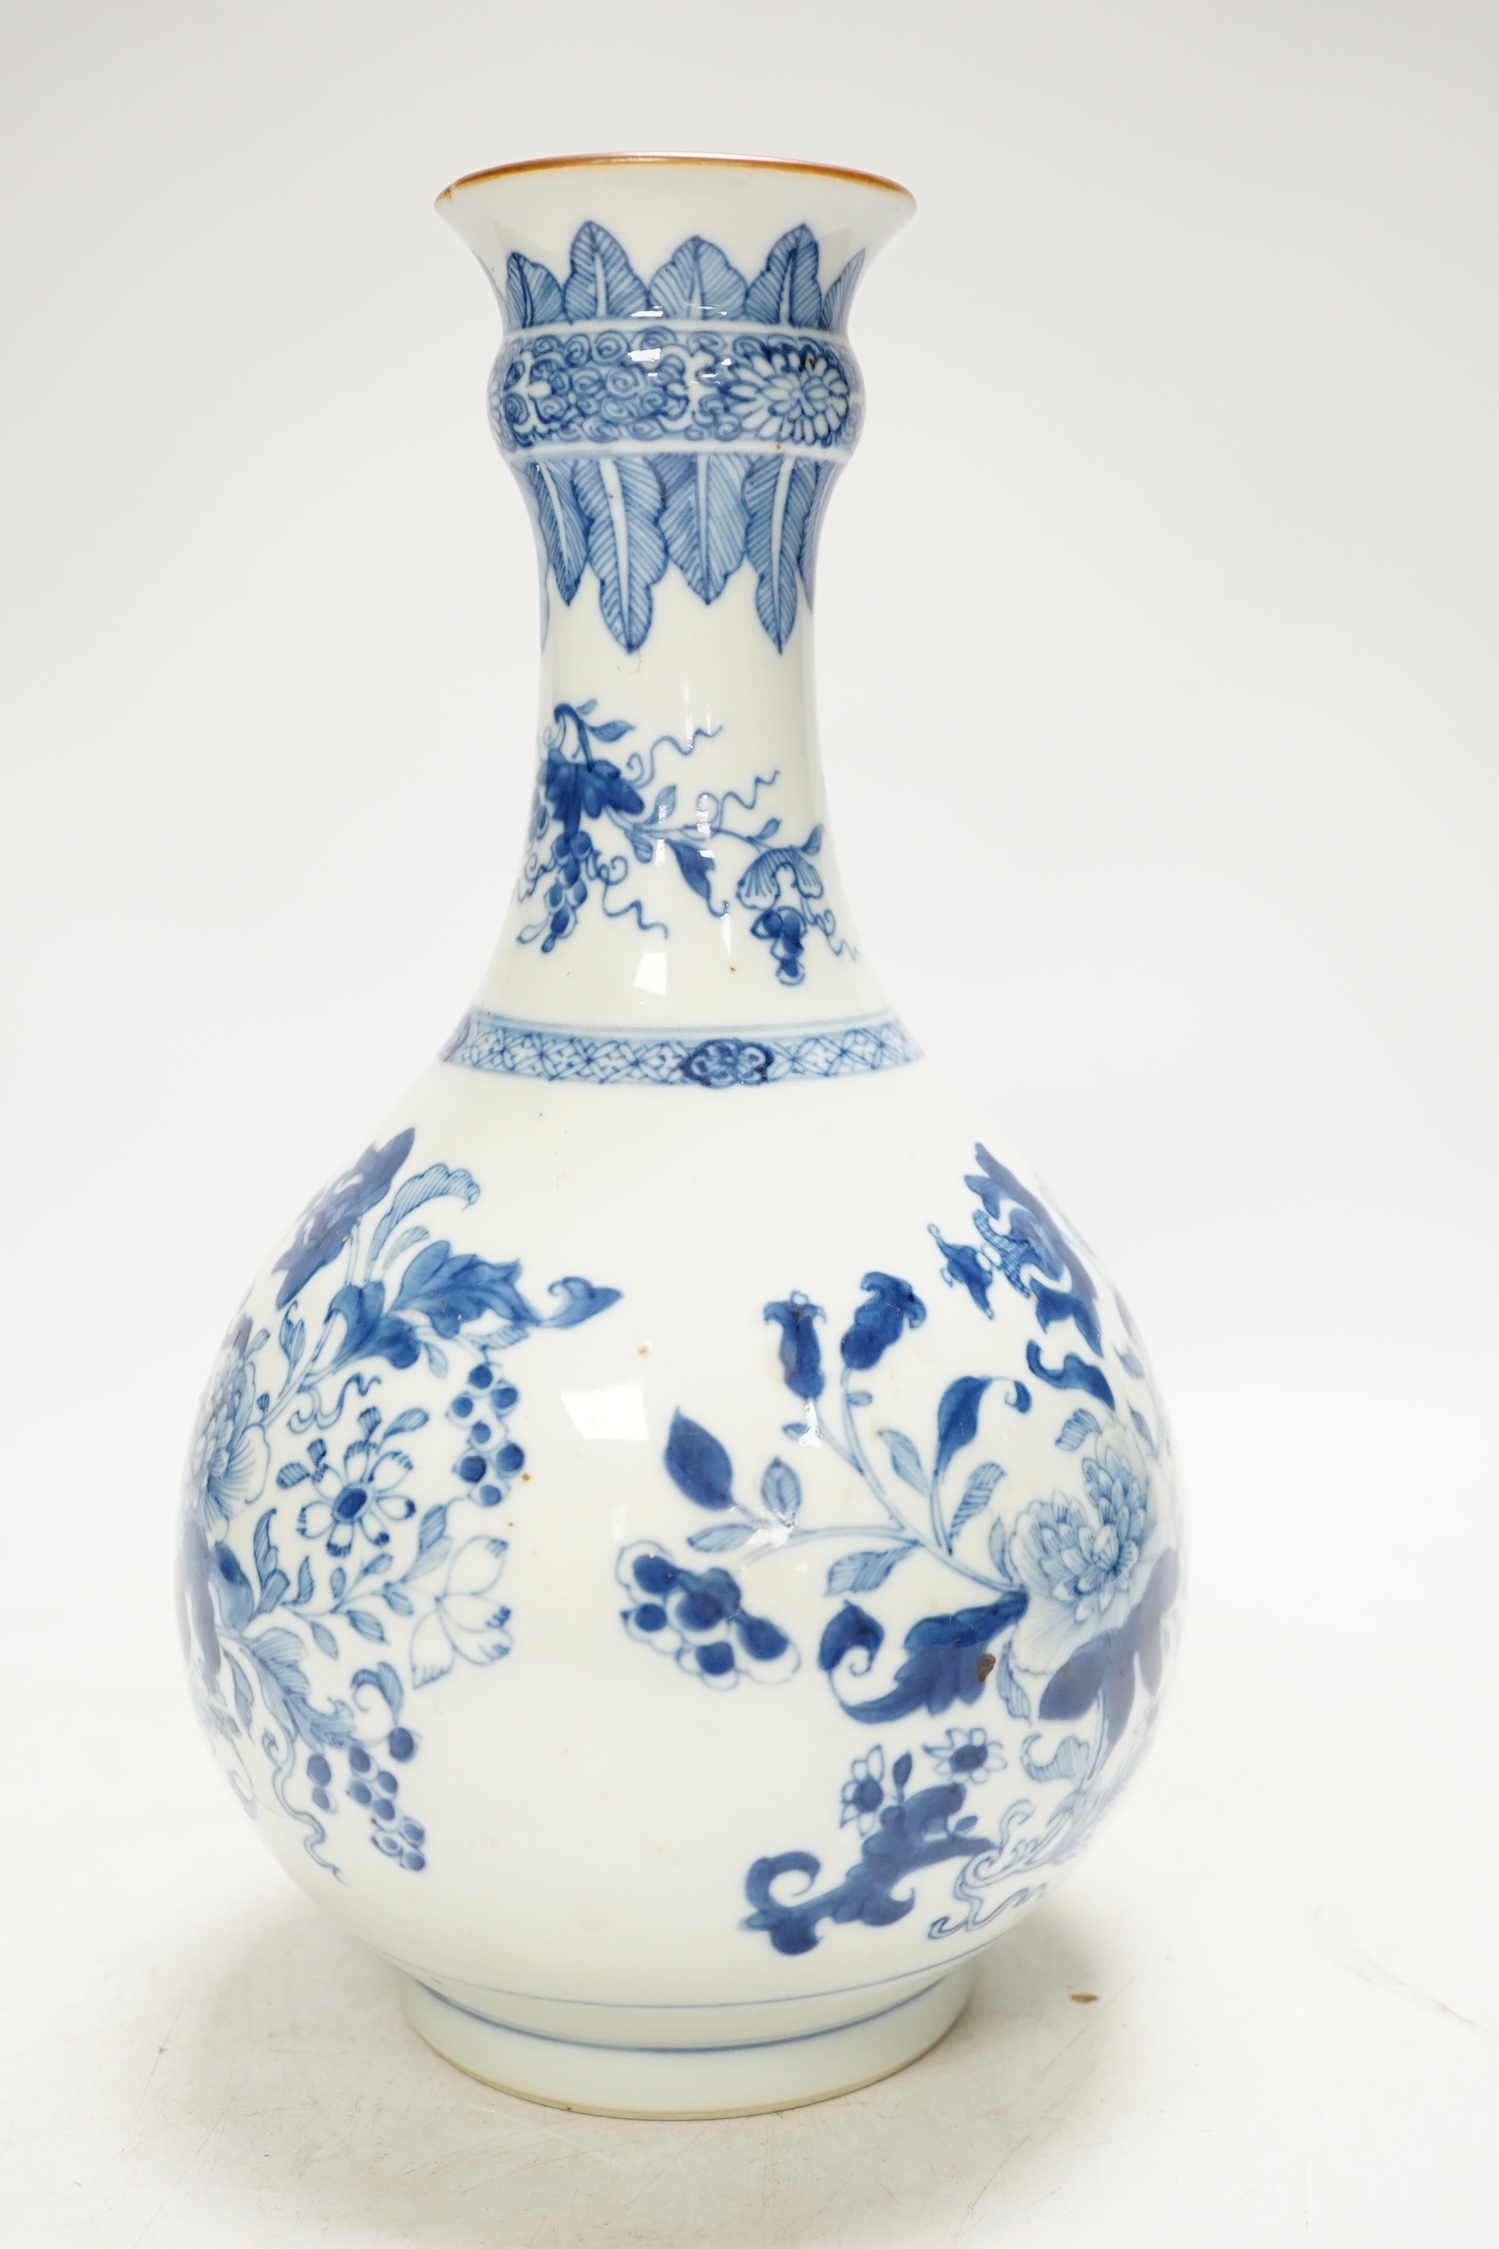 A 18th century Chinese blue and white bottle vase (guglet), 25cm. Condition - good